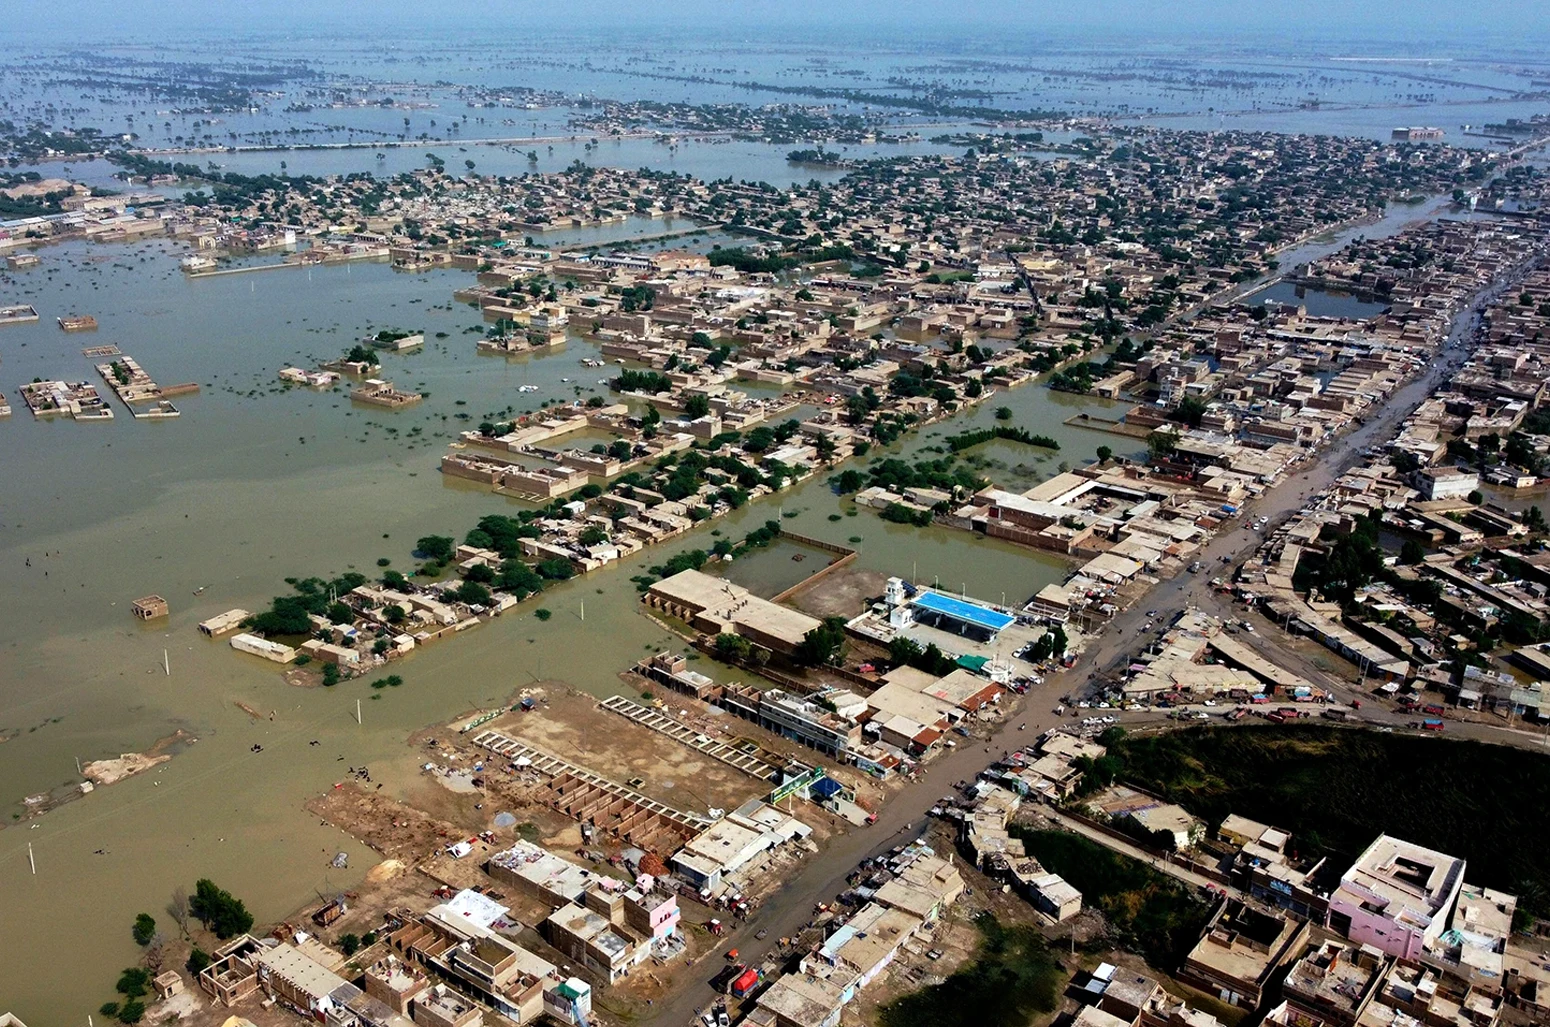 Homes are surrounded by floodwaters in Sohbat Pur city, a district of Pakistan's southwestern Baluchistan province, on 30 August 2022.